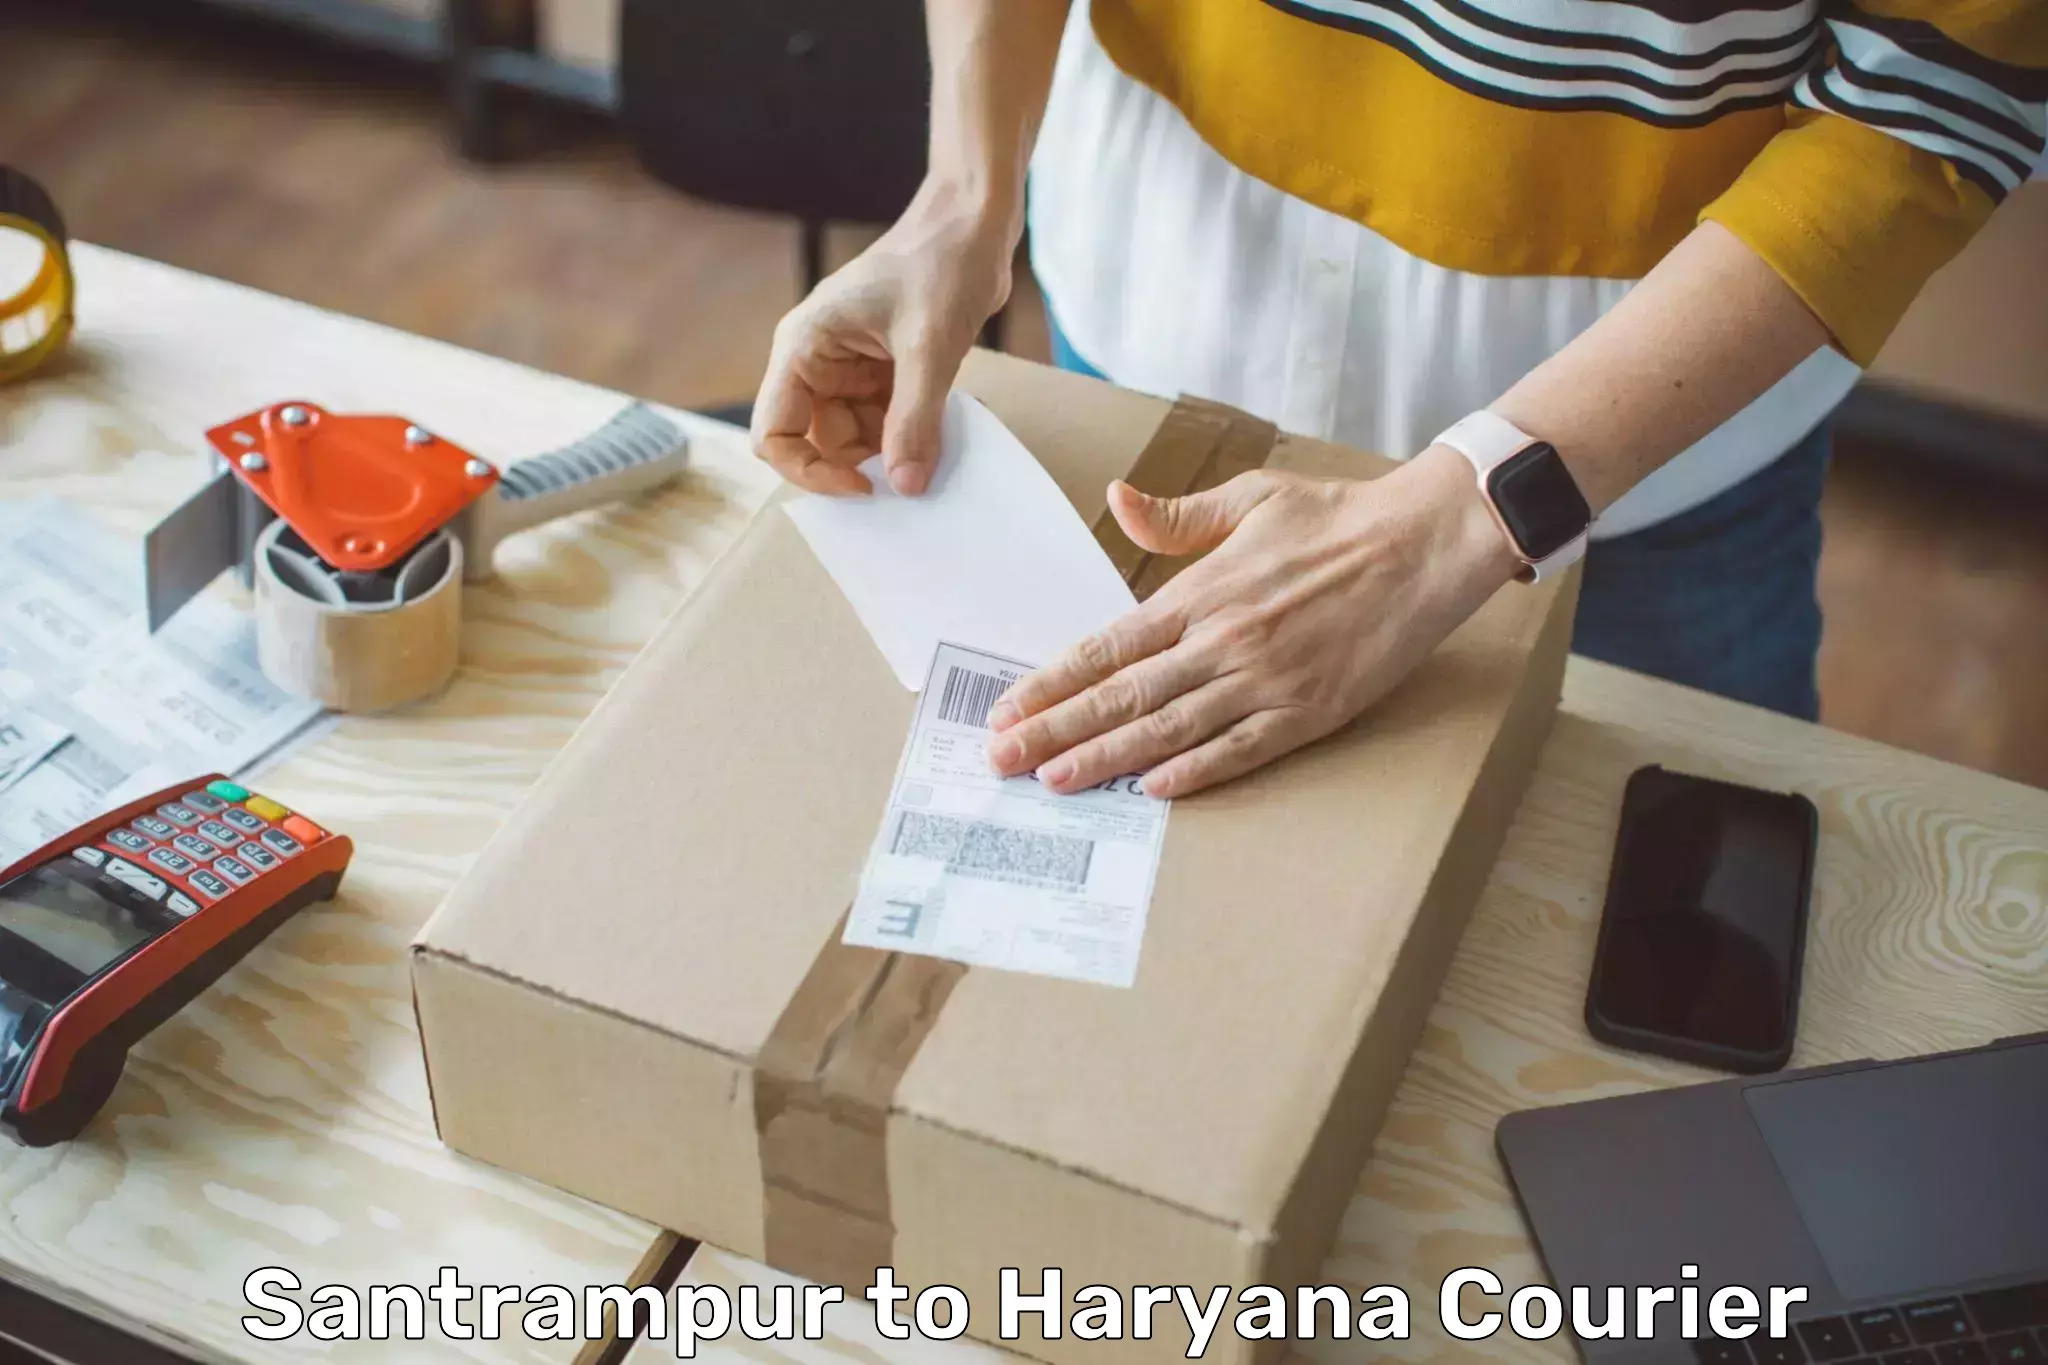 Courier service partnerships Santrampur to Haryana